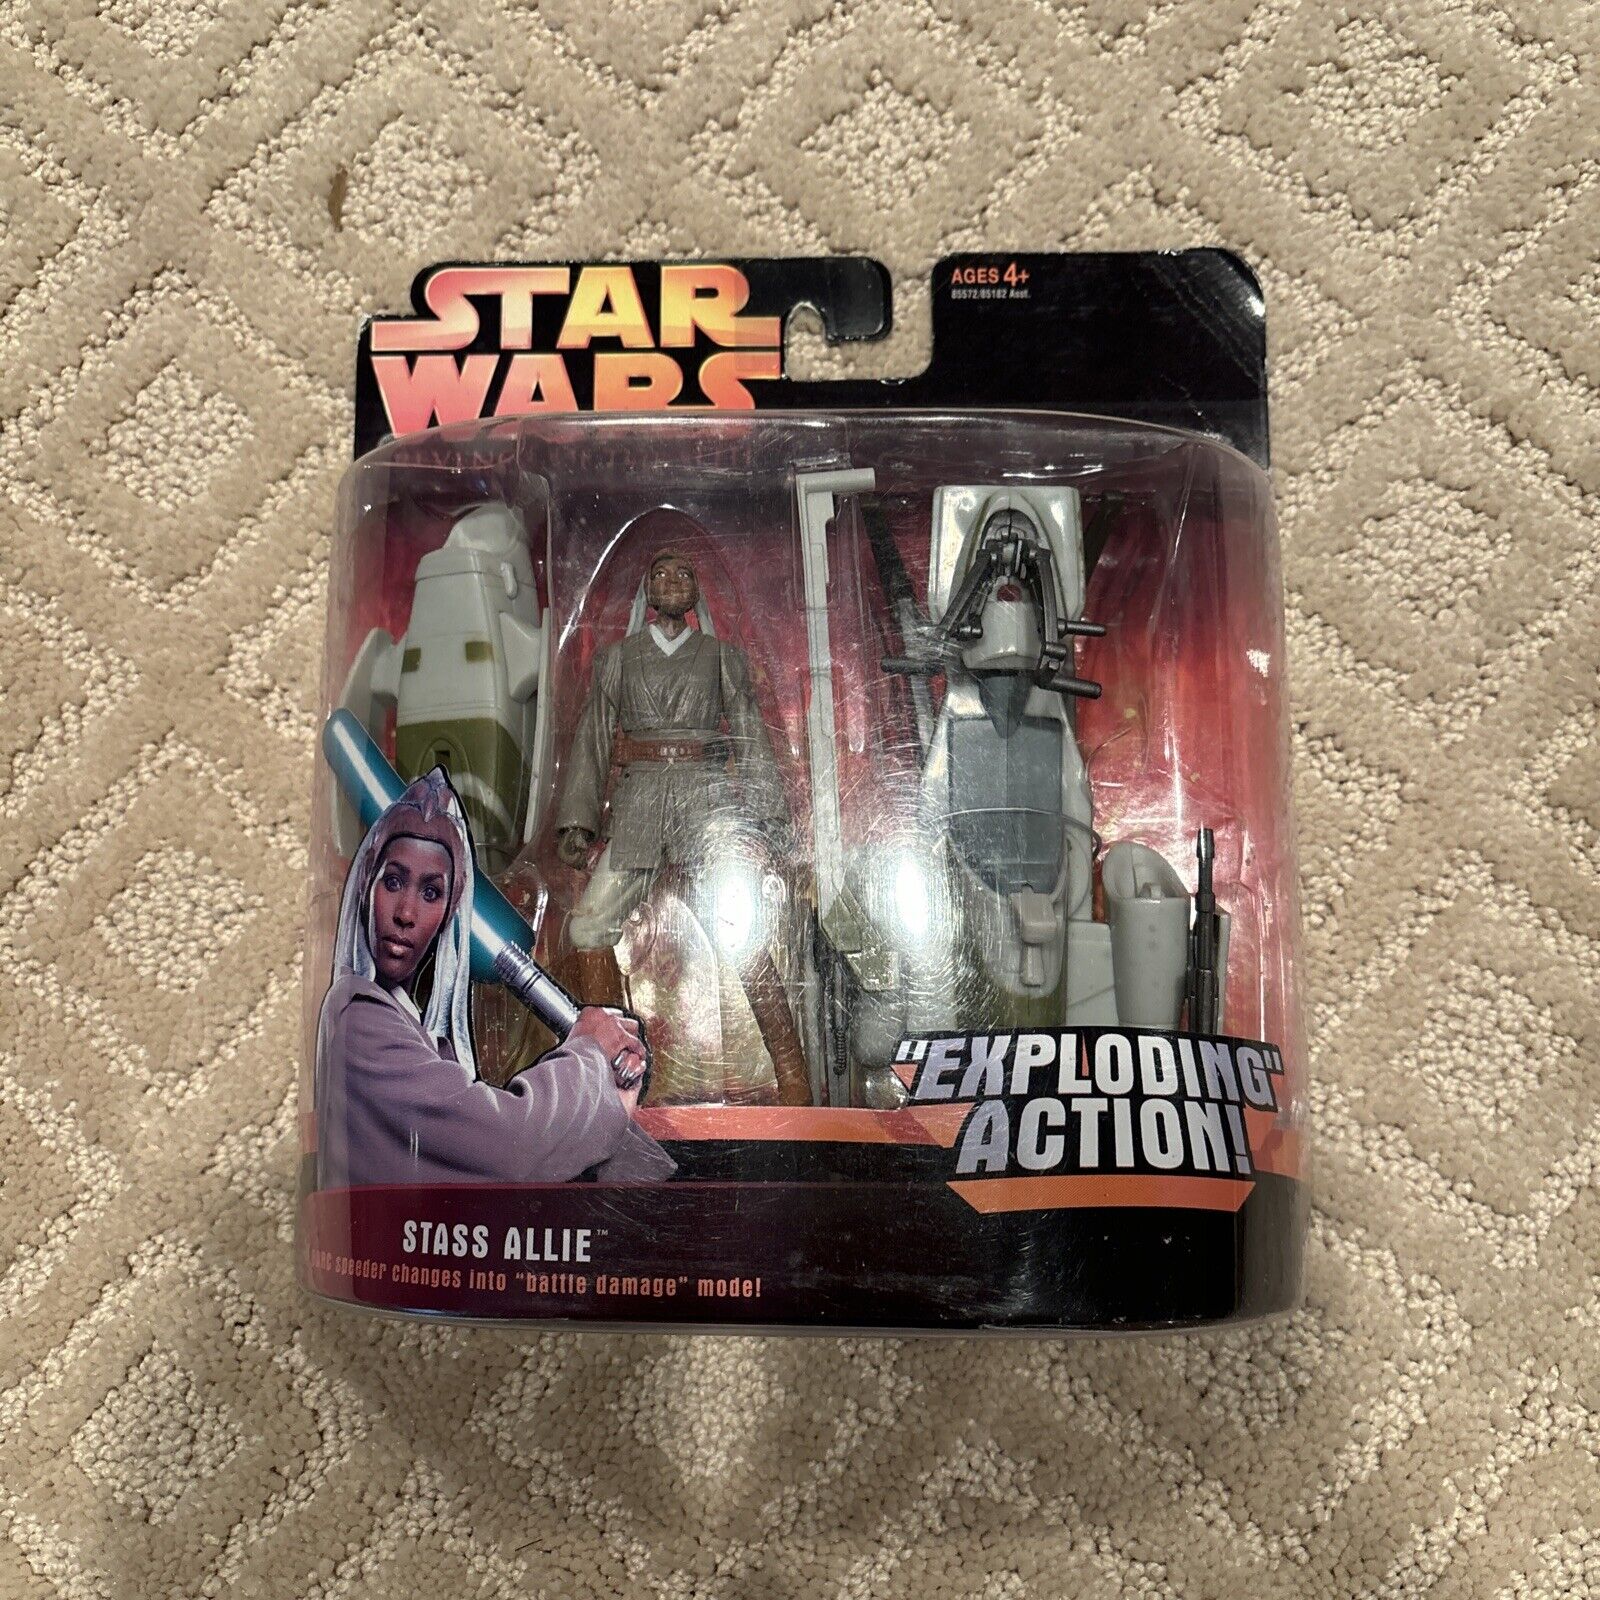 Star Wars Revenge of the Sith Stass Allie Exploding Action Deluxe 2005  NEW MOC